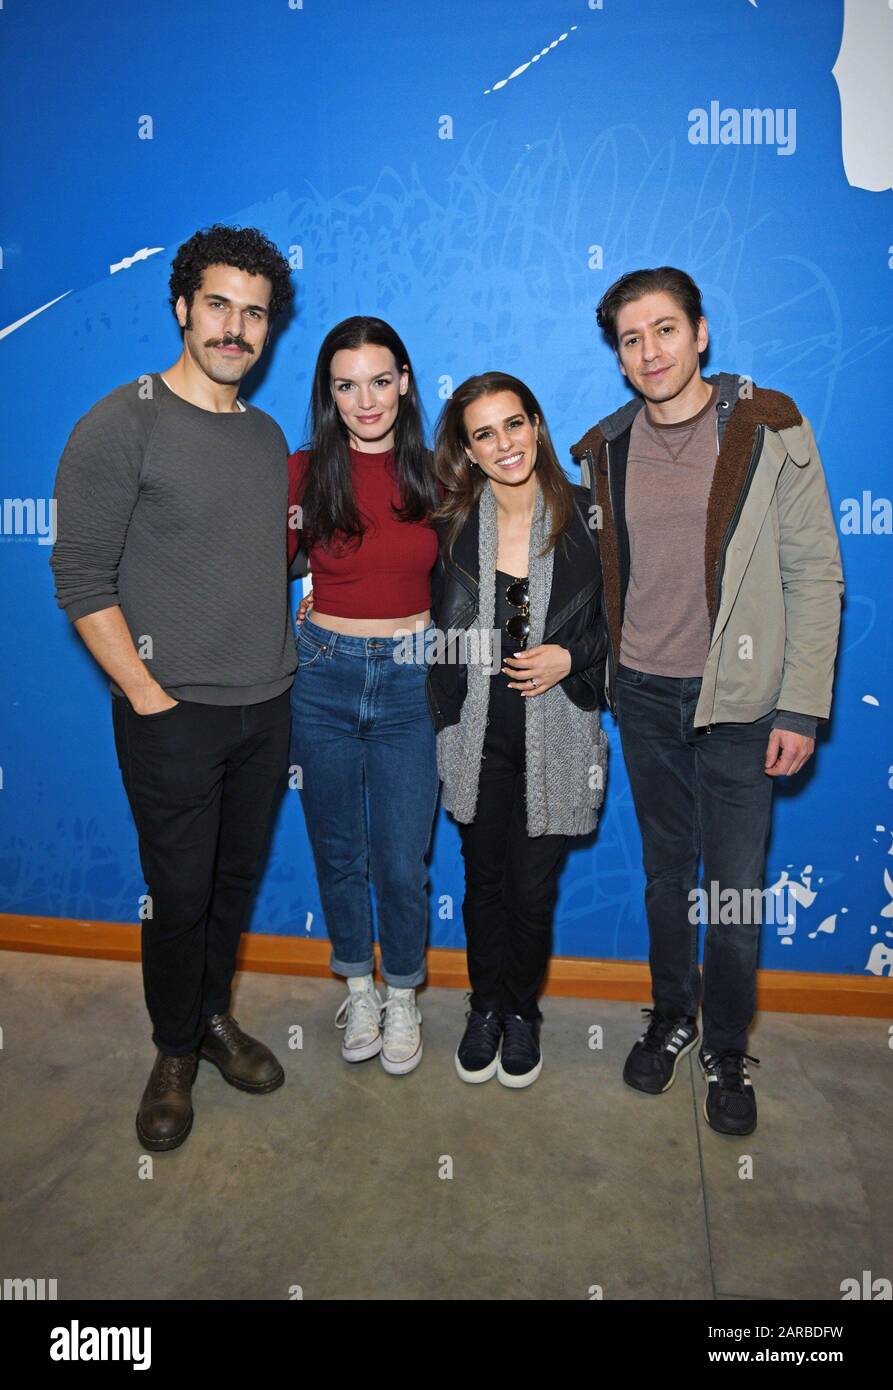 New York, NY, USA. 26th Jan, 2020. Joel Perez, Jennifer Damiano, Ana Nogueira, Michael Zegen in attendance for Bob & Carol & Ted & Alice Cast, Tthe New Group at the Pershing Square Signature Center, New York, NY January 26, 2020. Credit: Derek Storm/Everett Collection/Alamy Live News Stock Photo